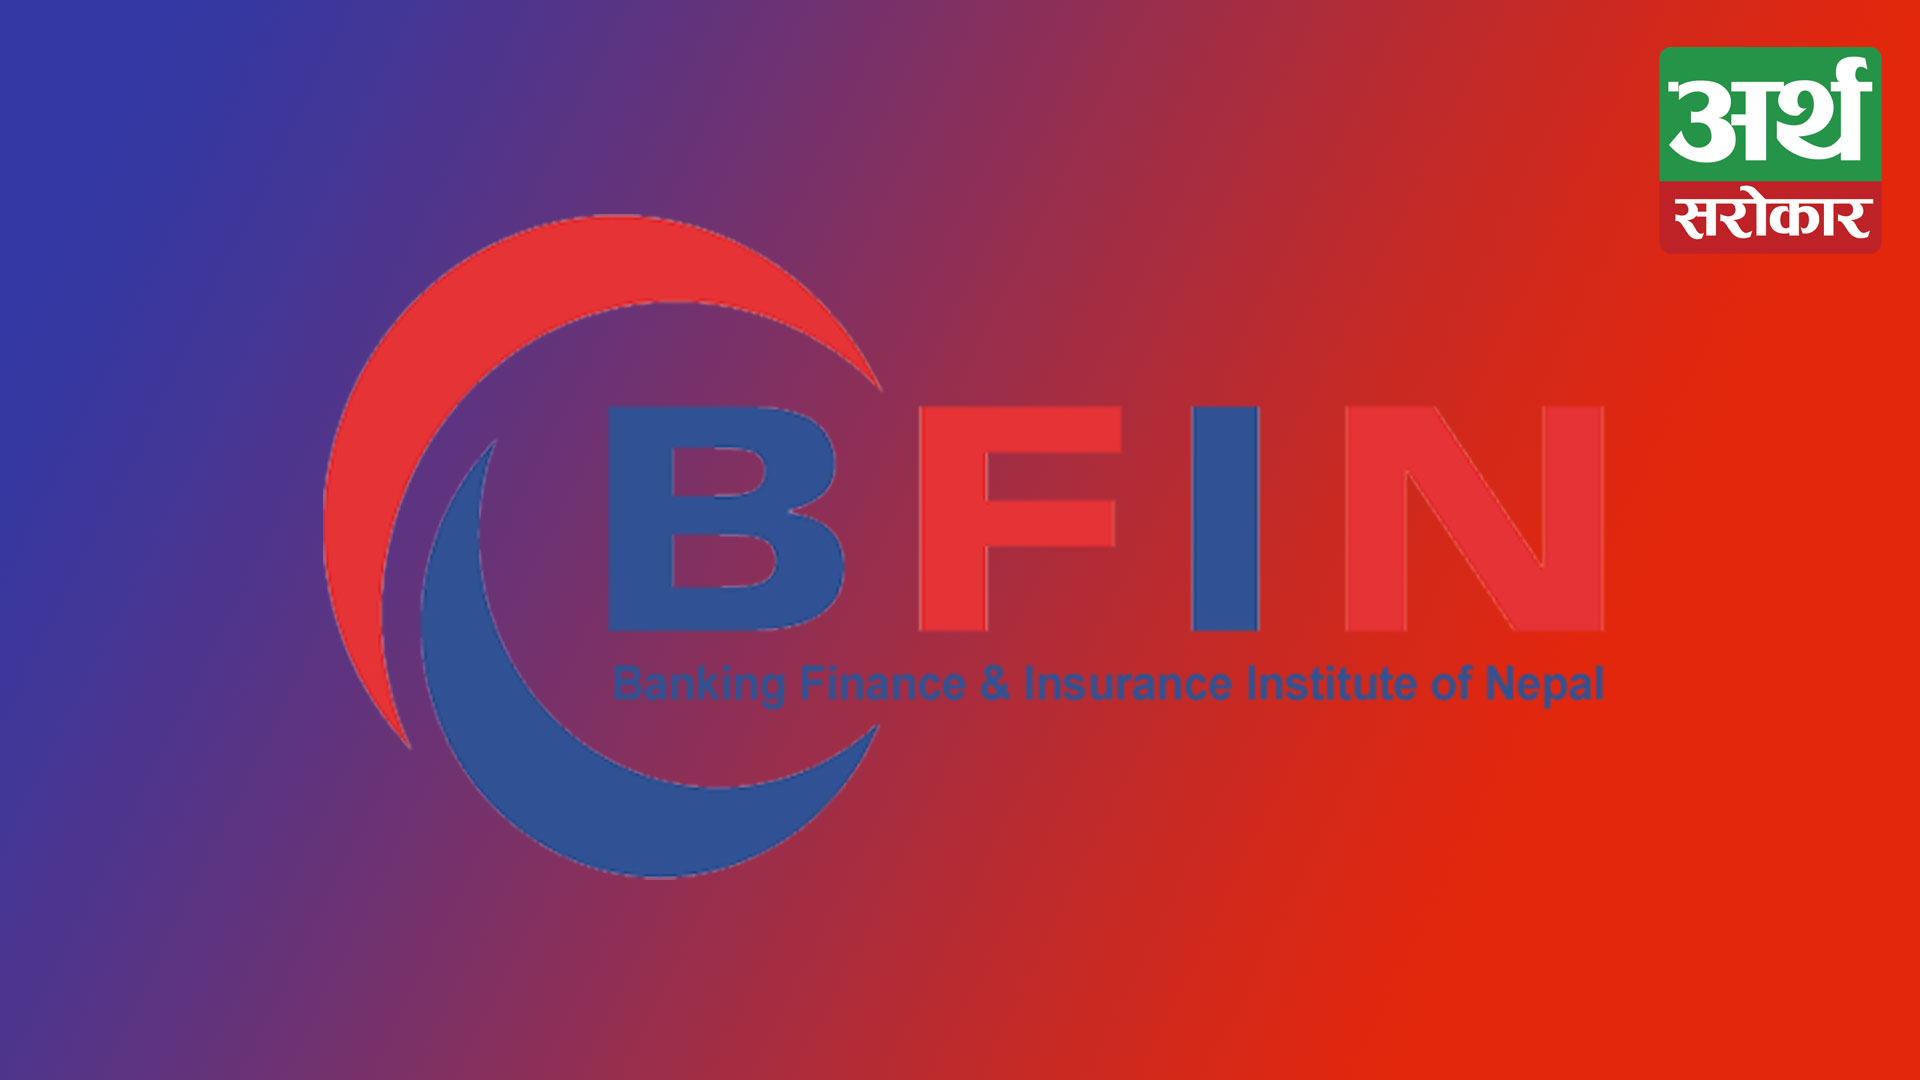 BFIN to issue IPO to general public